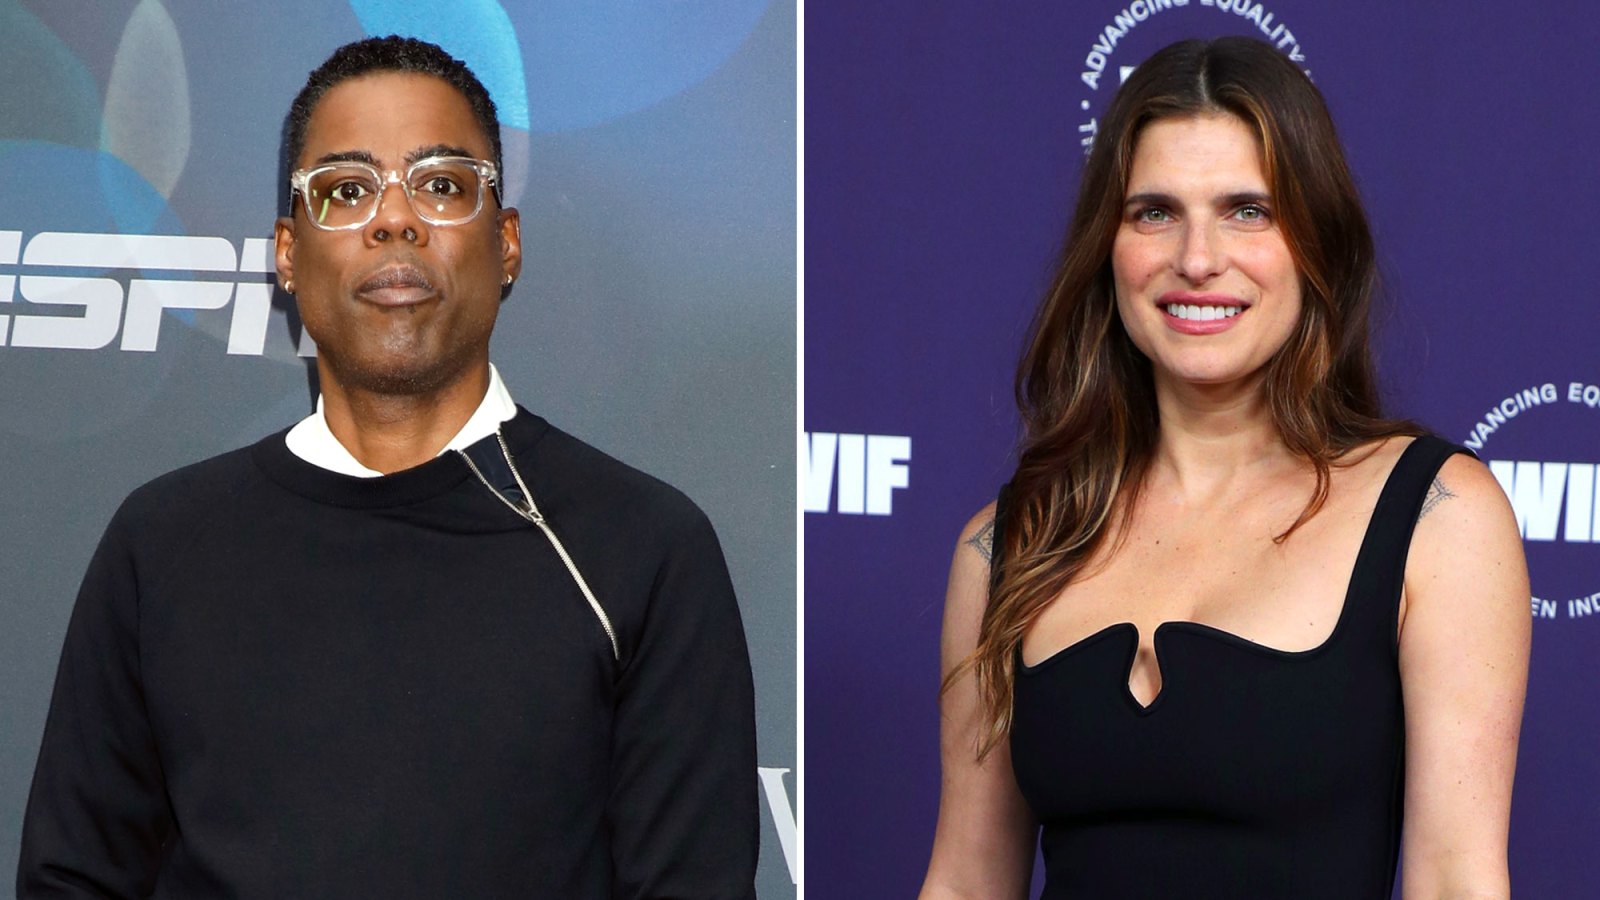 Chris Rock Is in a Really Good Mood Amid New Romance With Lake Bell